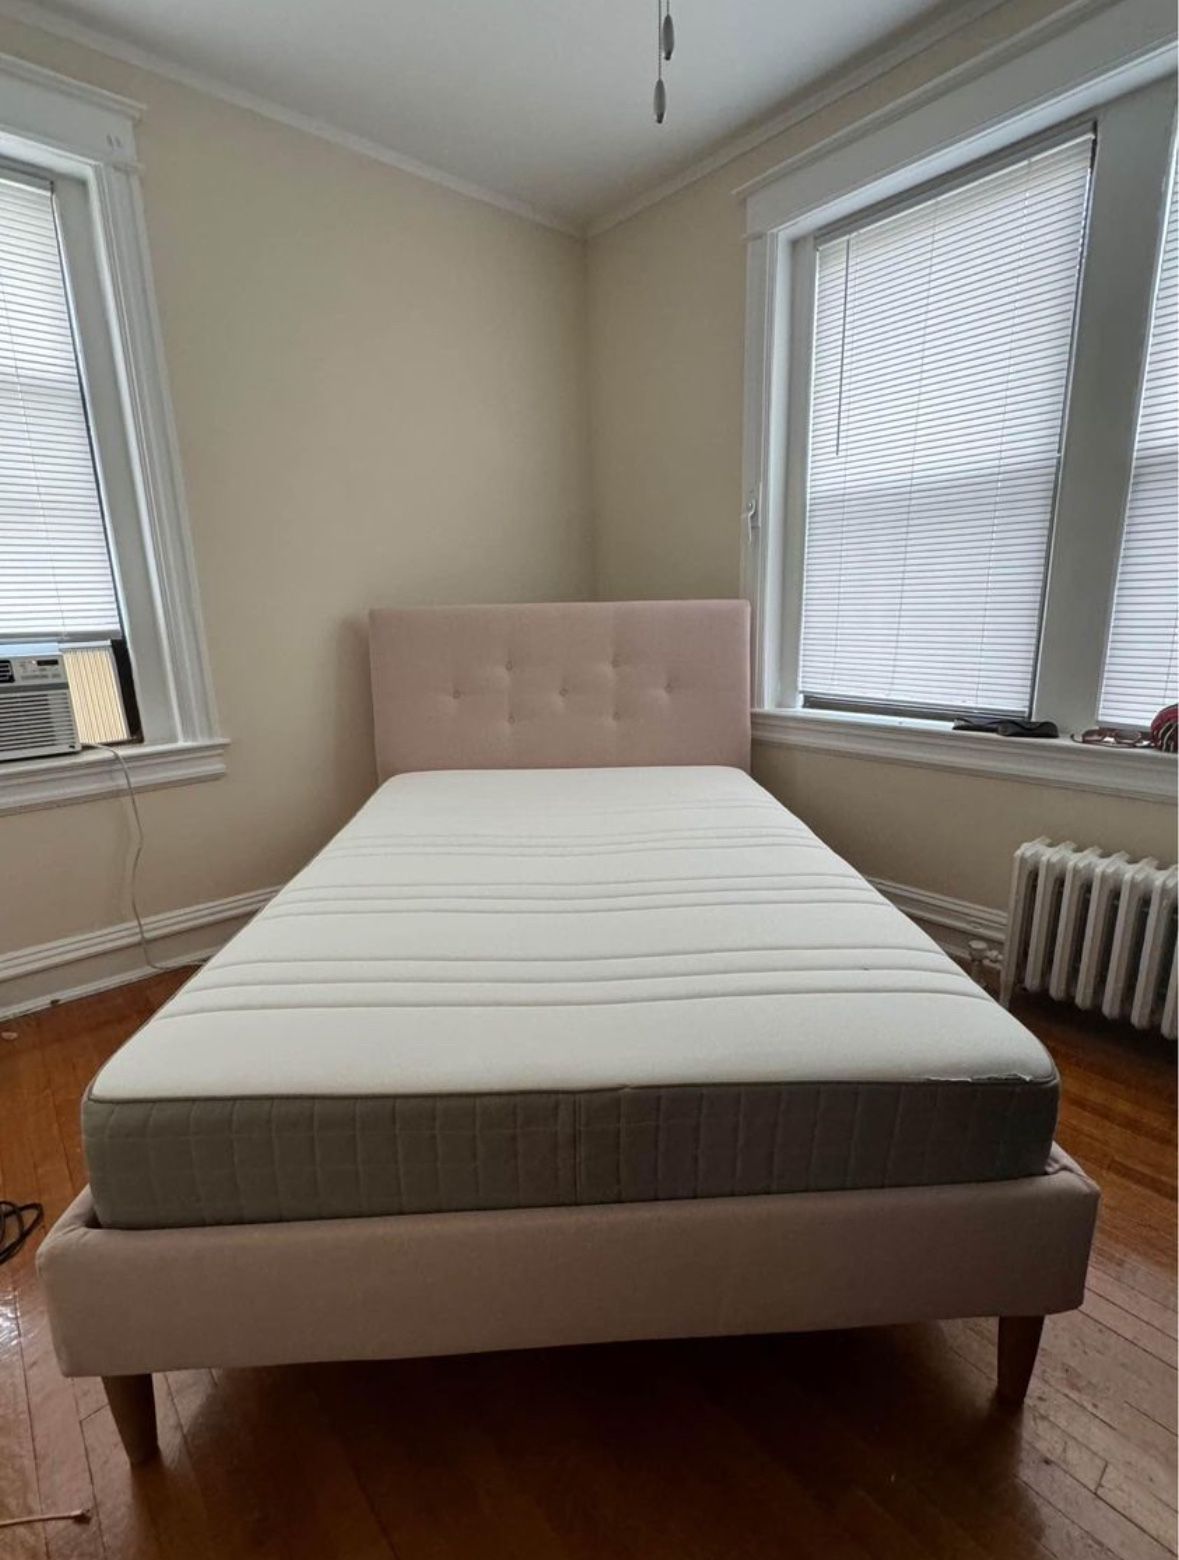 IKEA PINK FULL BED FRAME AND MATTRESS